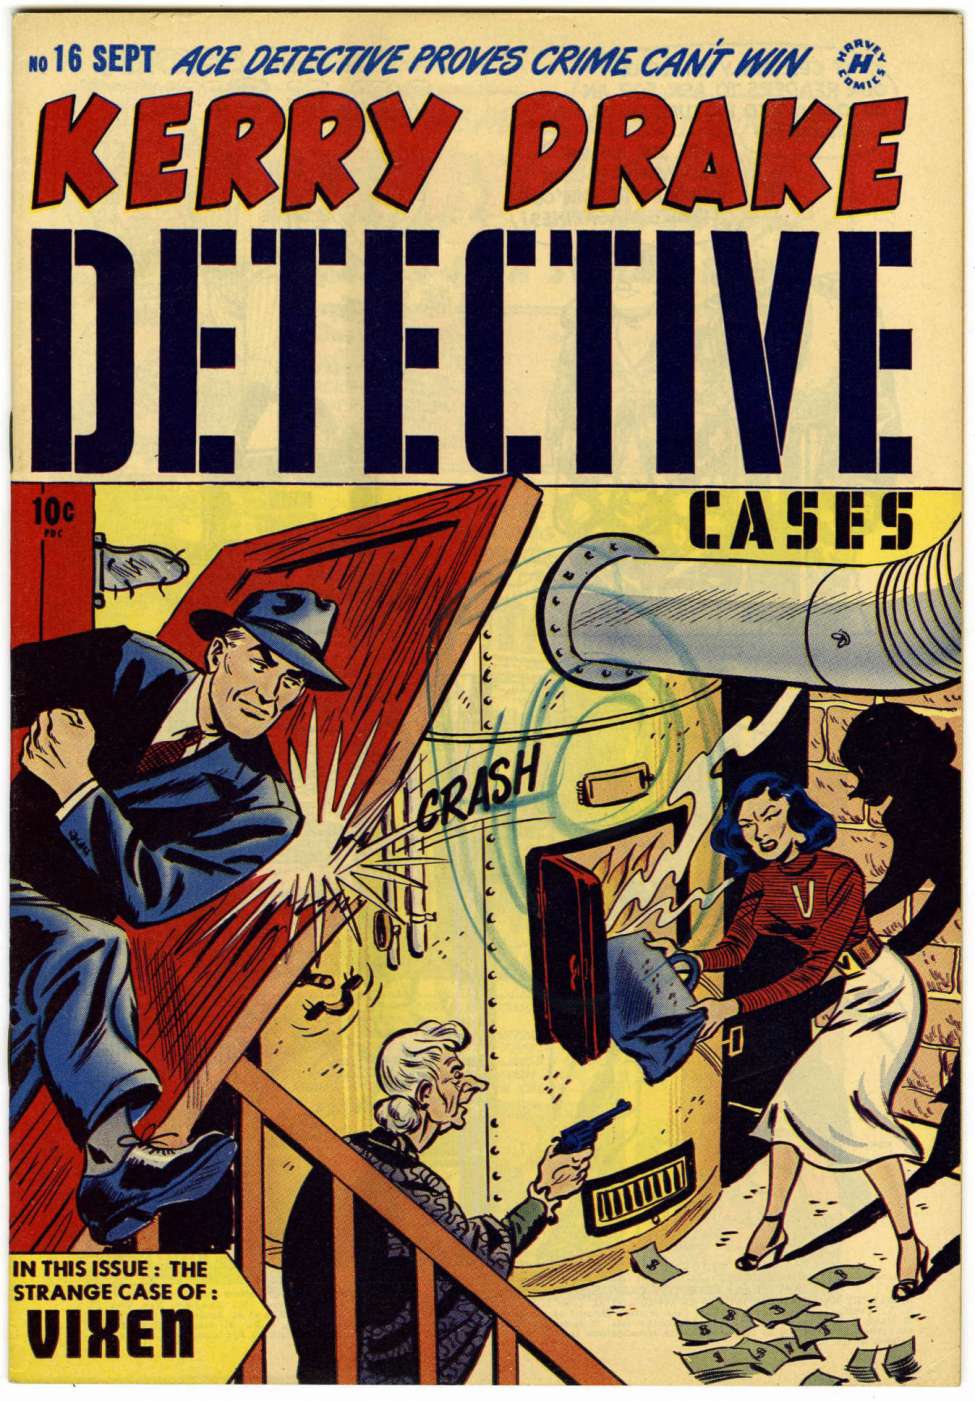 Comic Book Cover For Kerry Drake Detective Cases 16